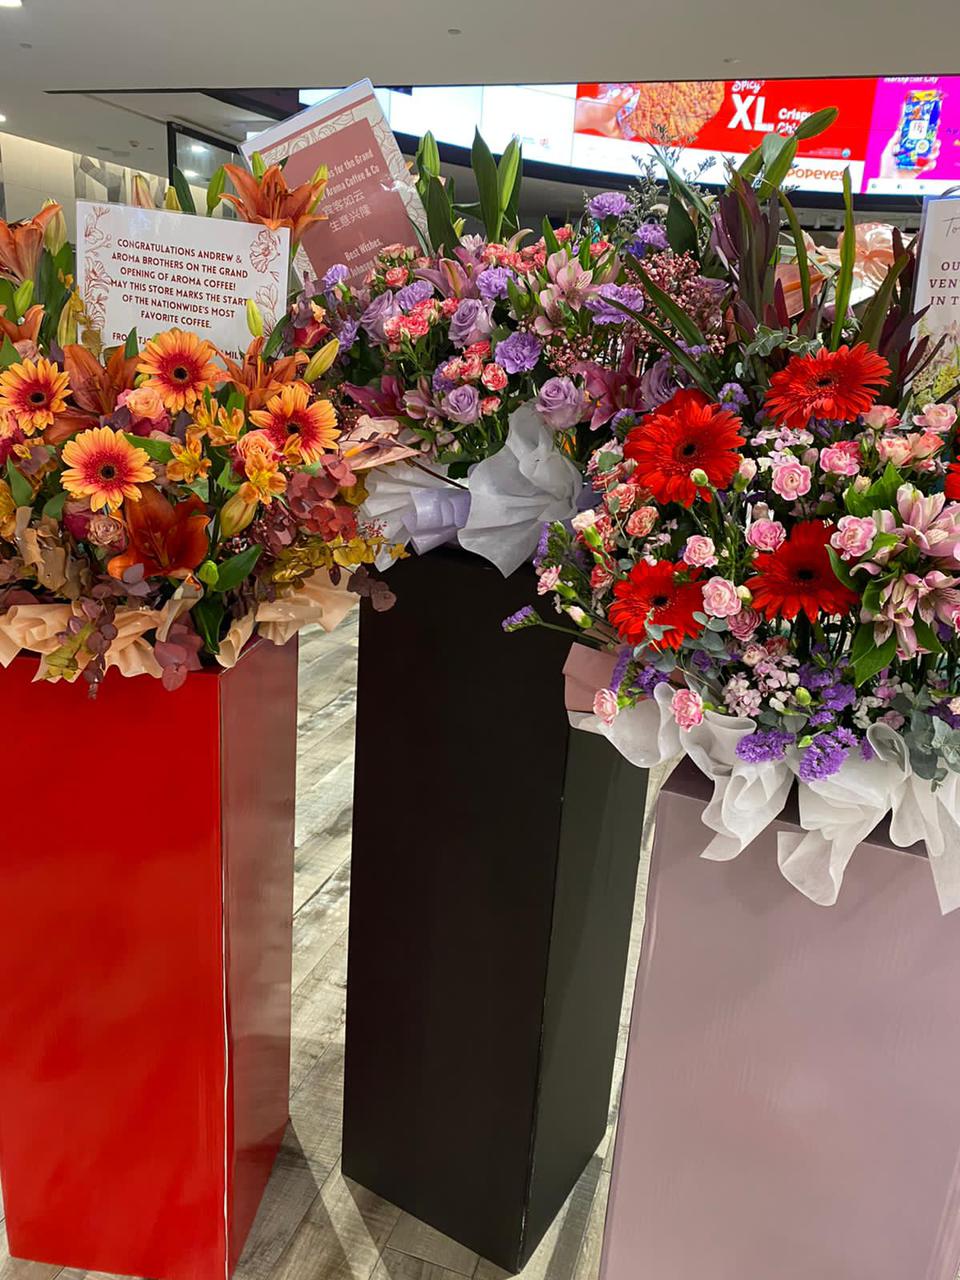 Opening Ceremony Flower Stand